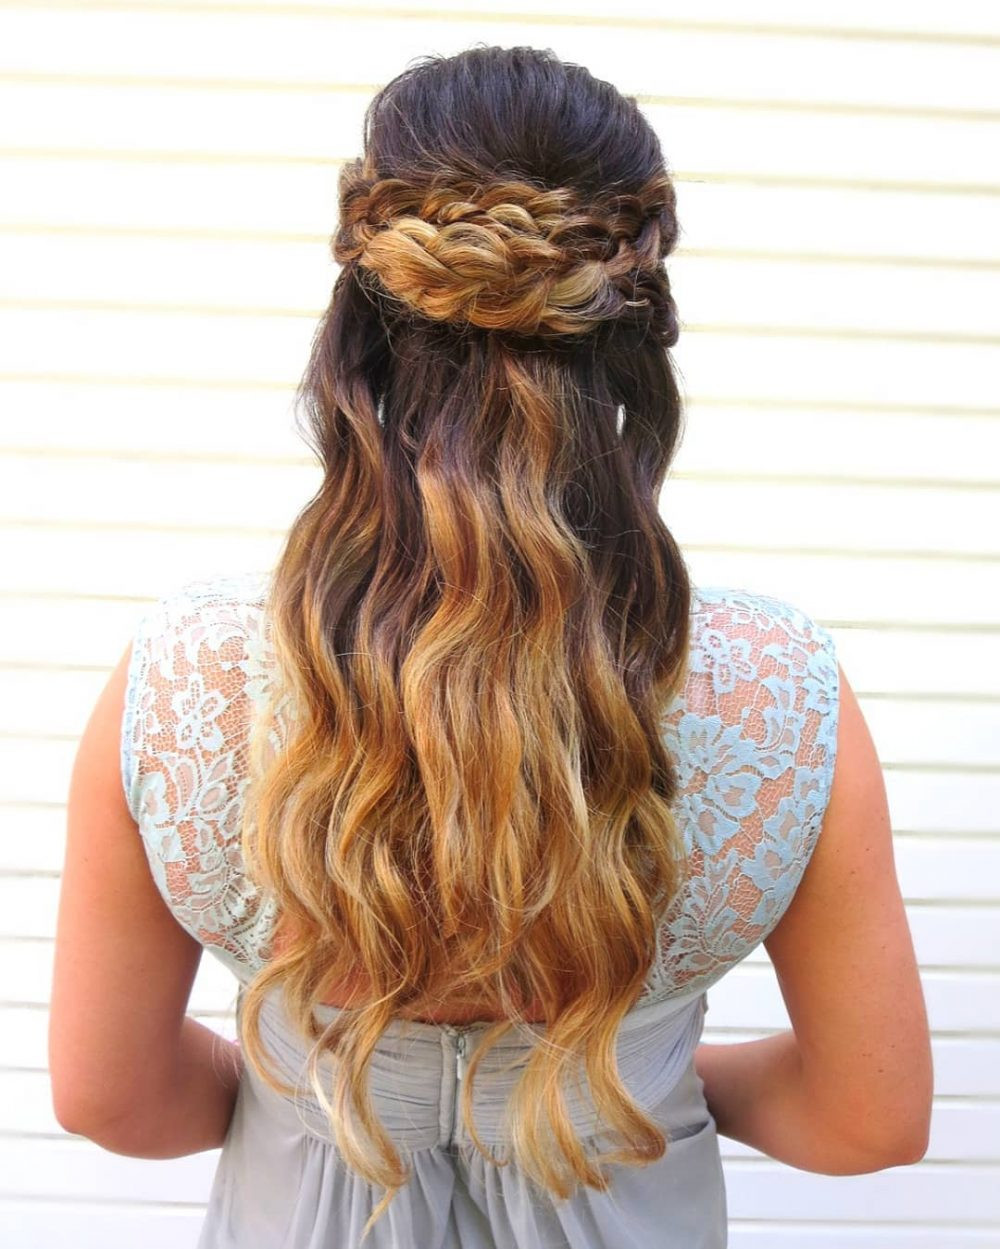 Half Up And Half Down Hairstyles For Prom
 27 Prettiest Half Up Half Down Prom Hairstyles for 2019